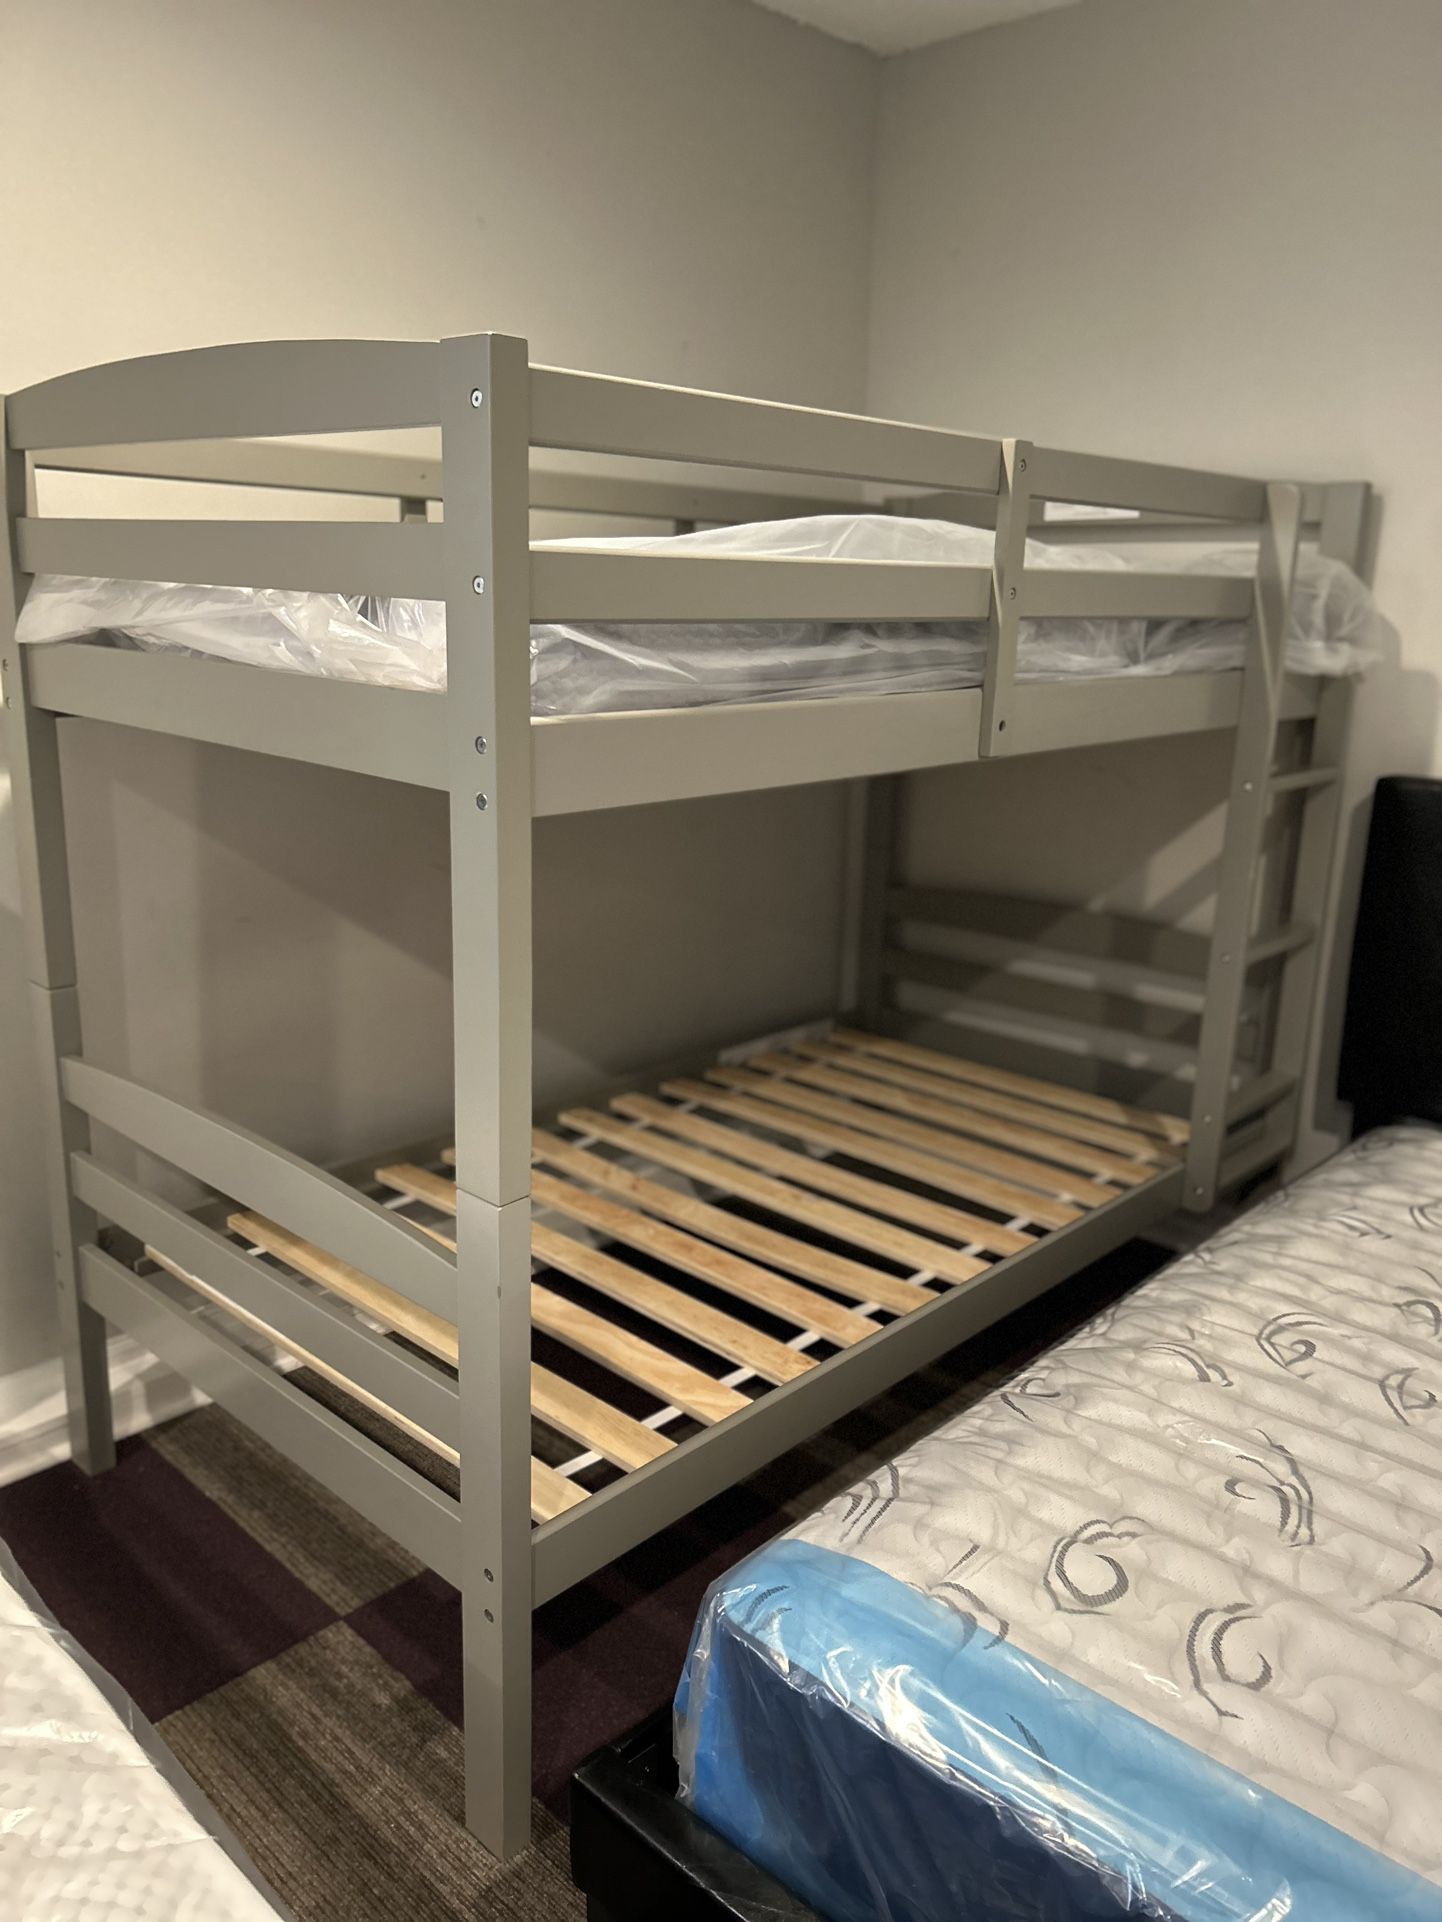 New Twin Size Bunkbed 